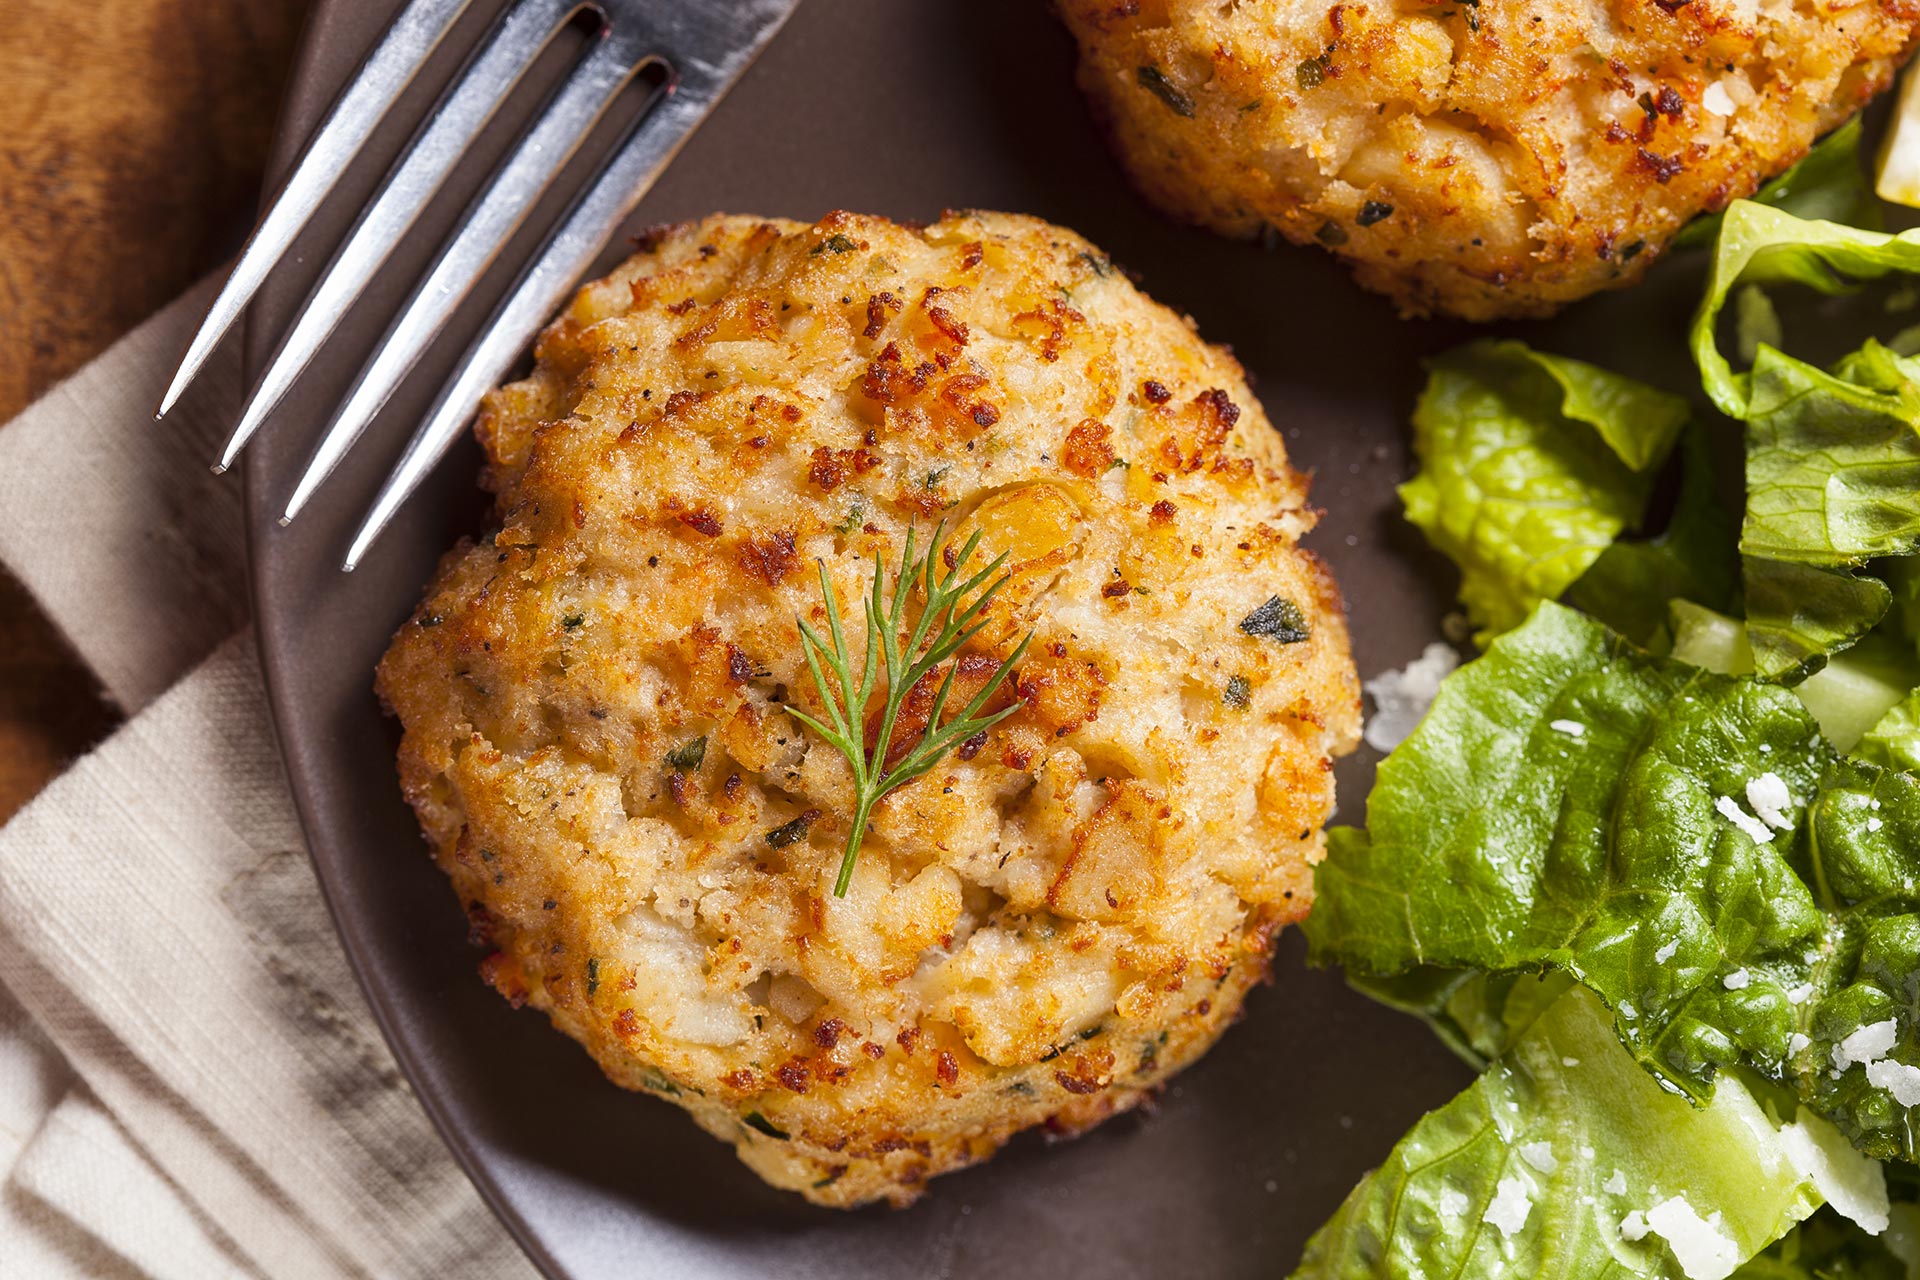 Crab Cakes on a plate - Delicious food